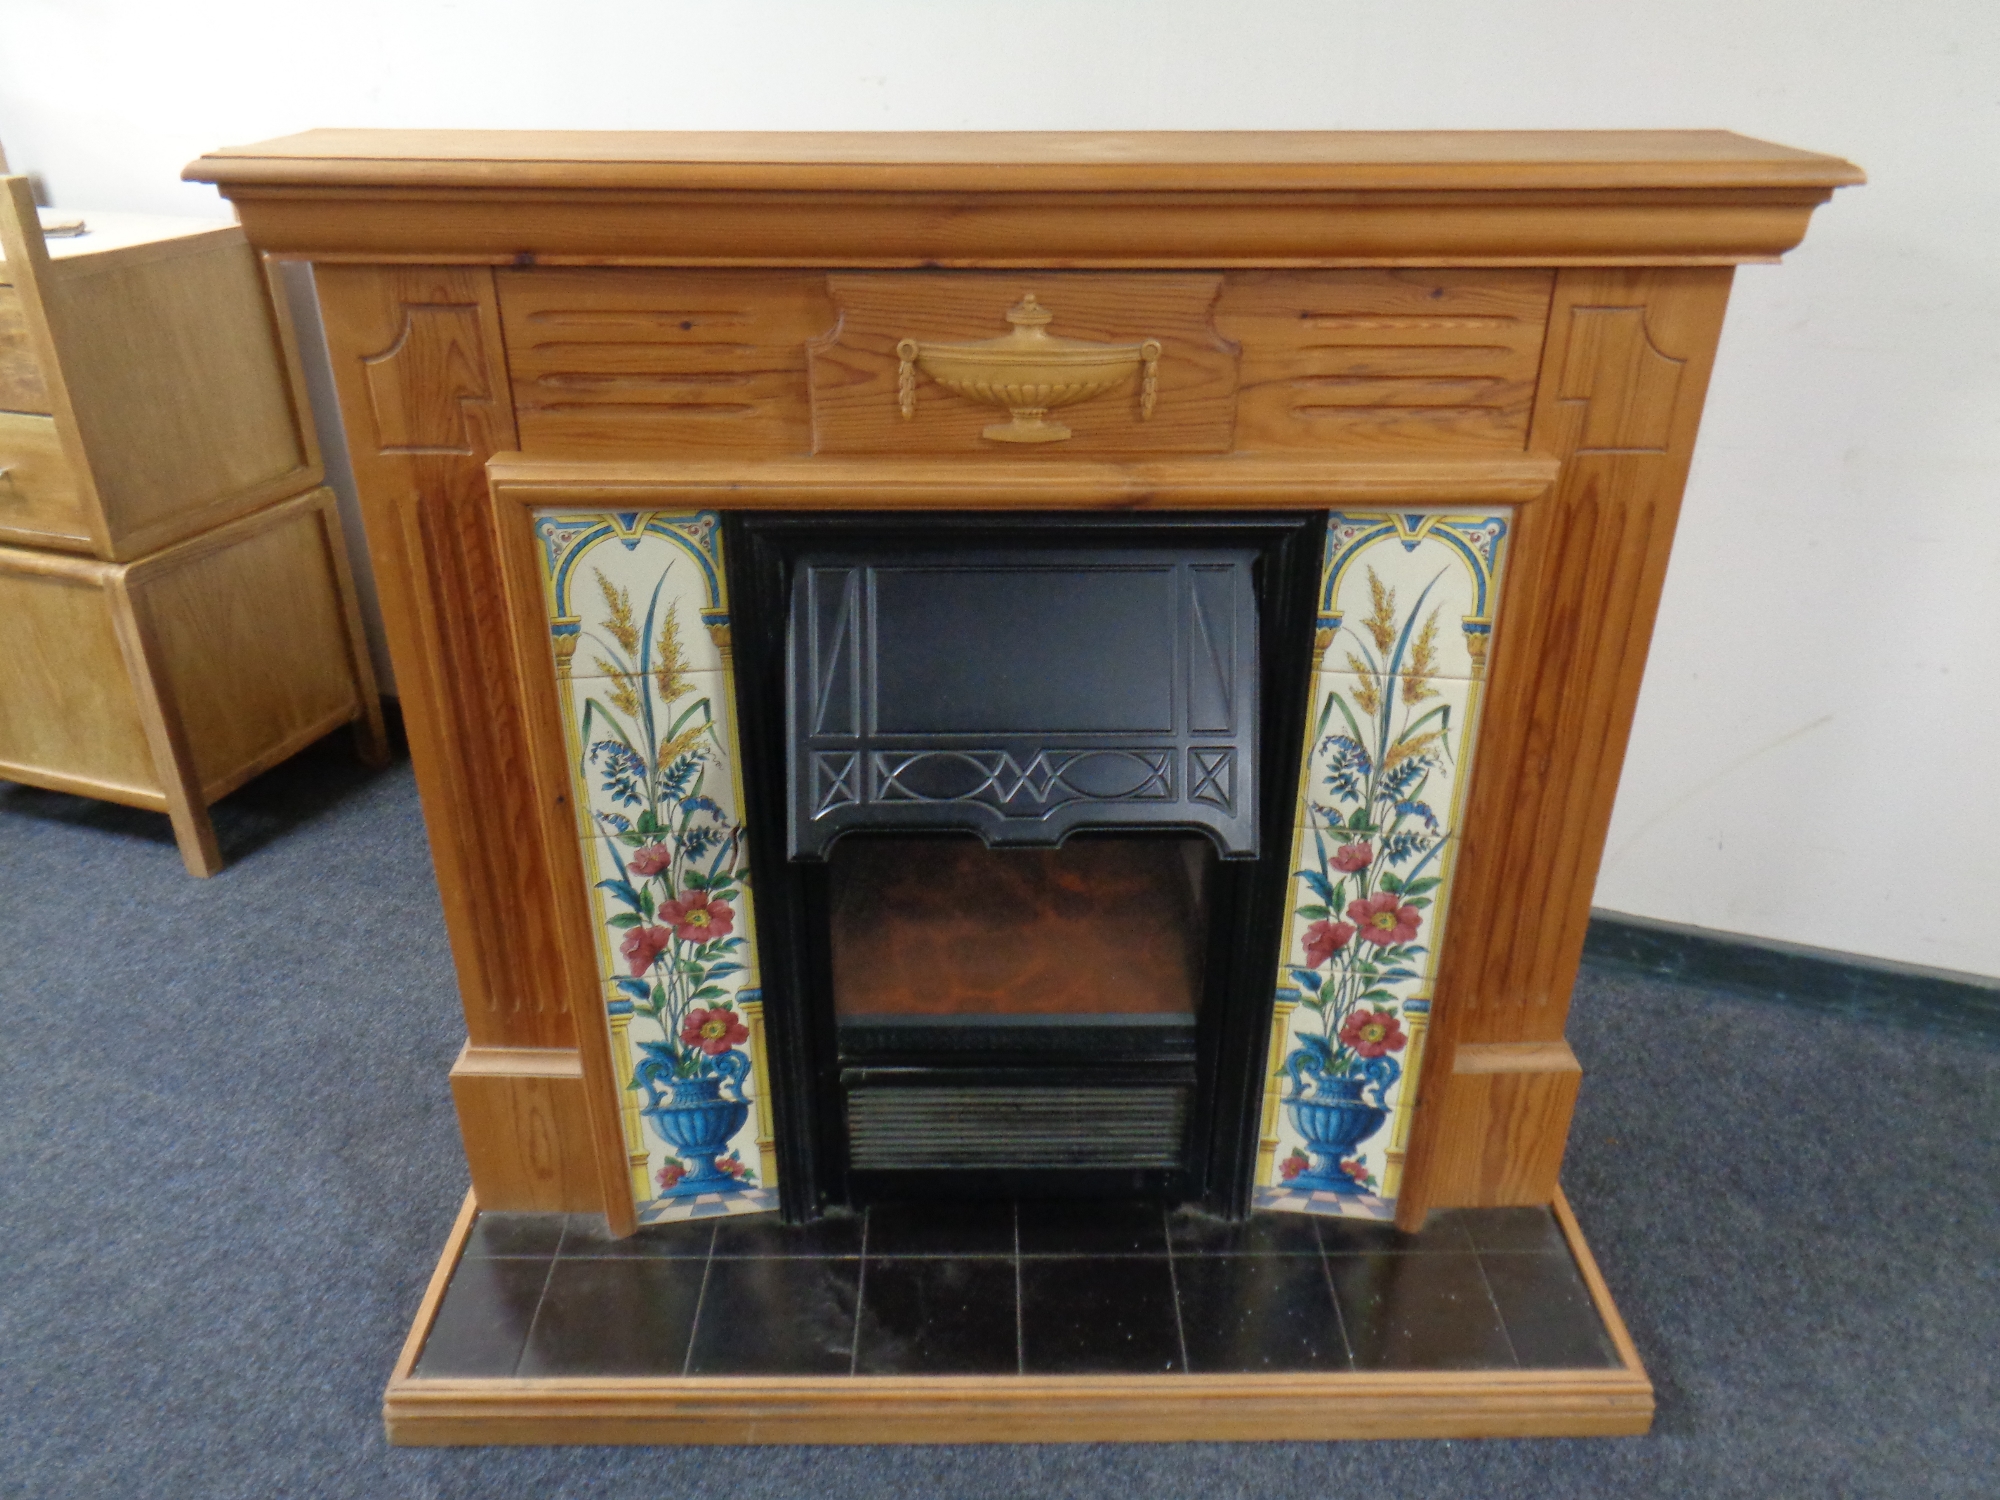 A contemporary electric fire insert in pine surround